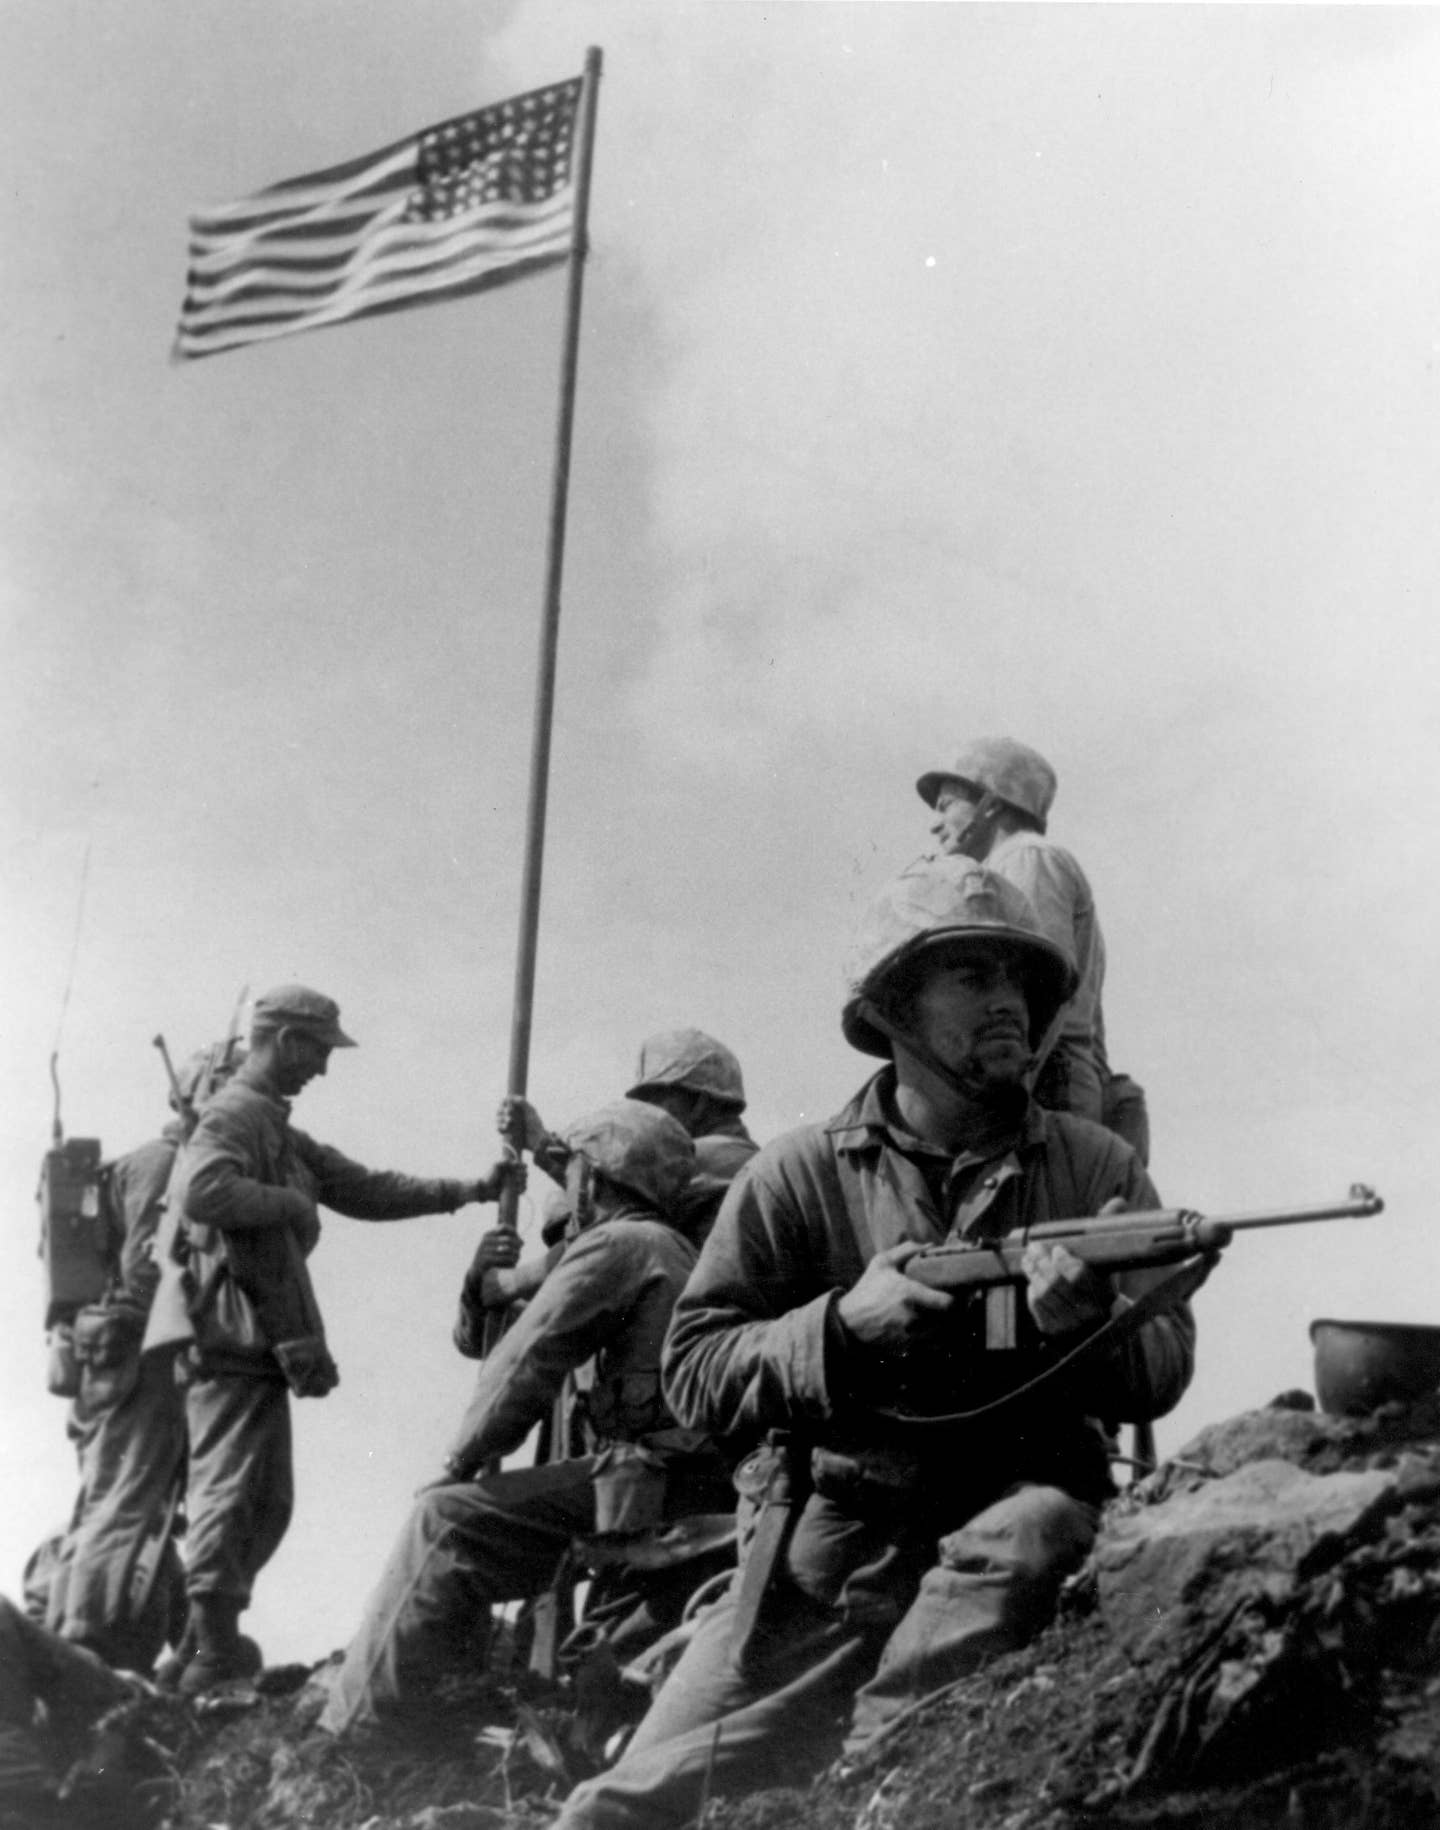 M1 Carbines were present at the first Iwo Jima flag raising. (USMC photo by Staff Sergeant Louis R. Lowery)